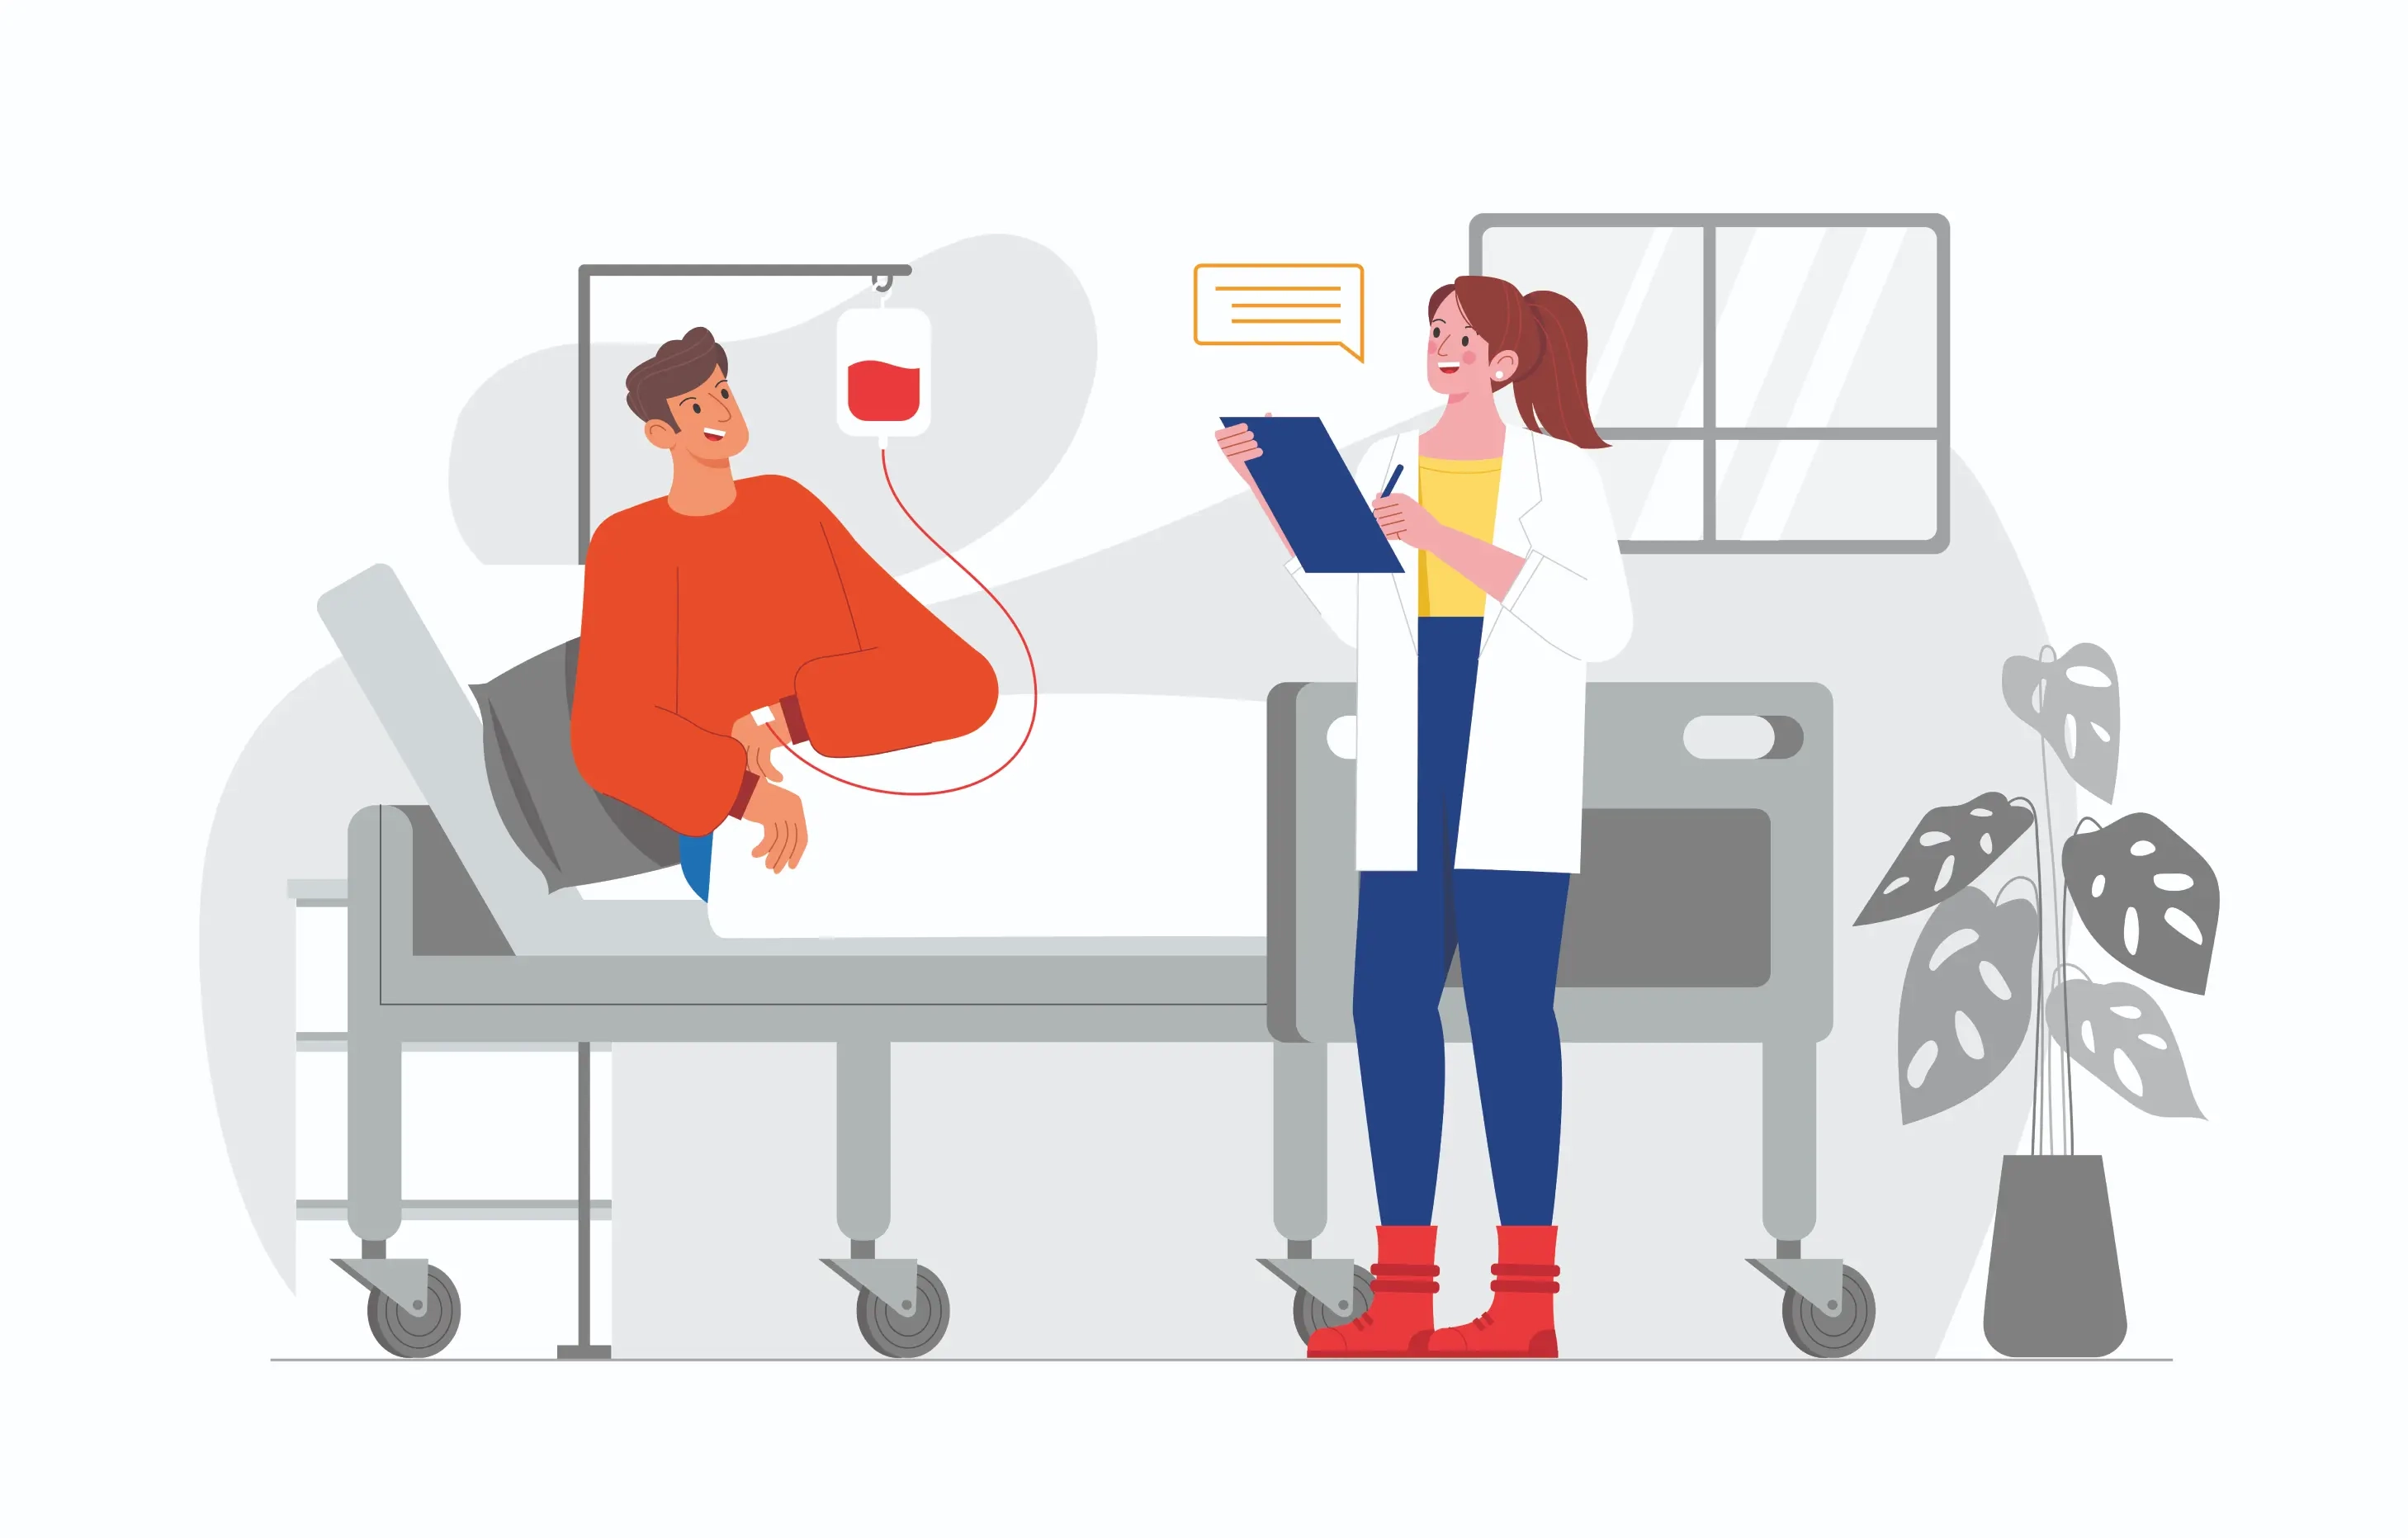 Doctor Therapist Talking to Disabled Patient Illustration image